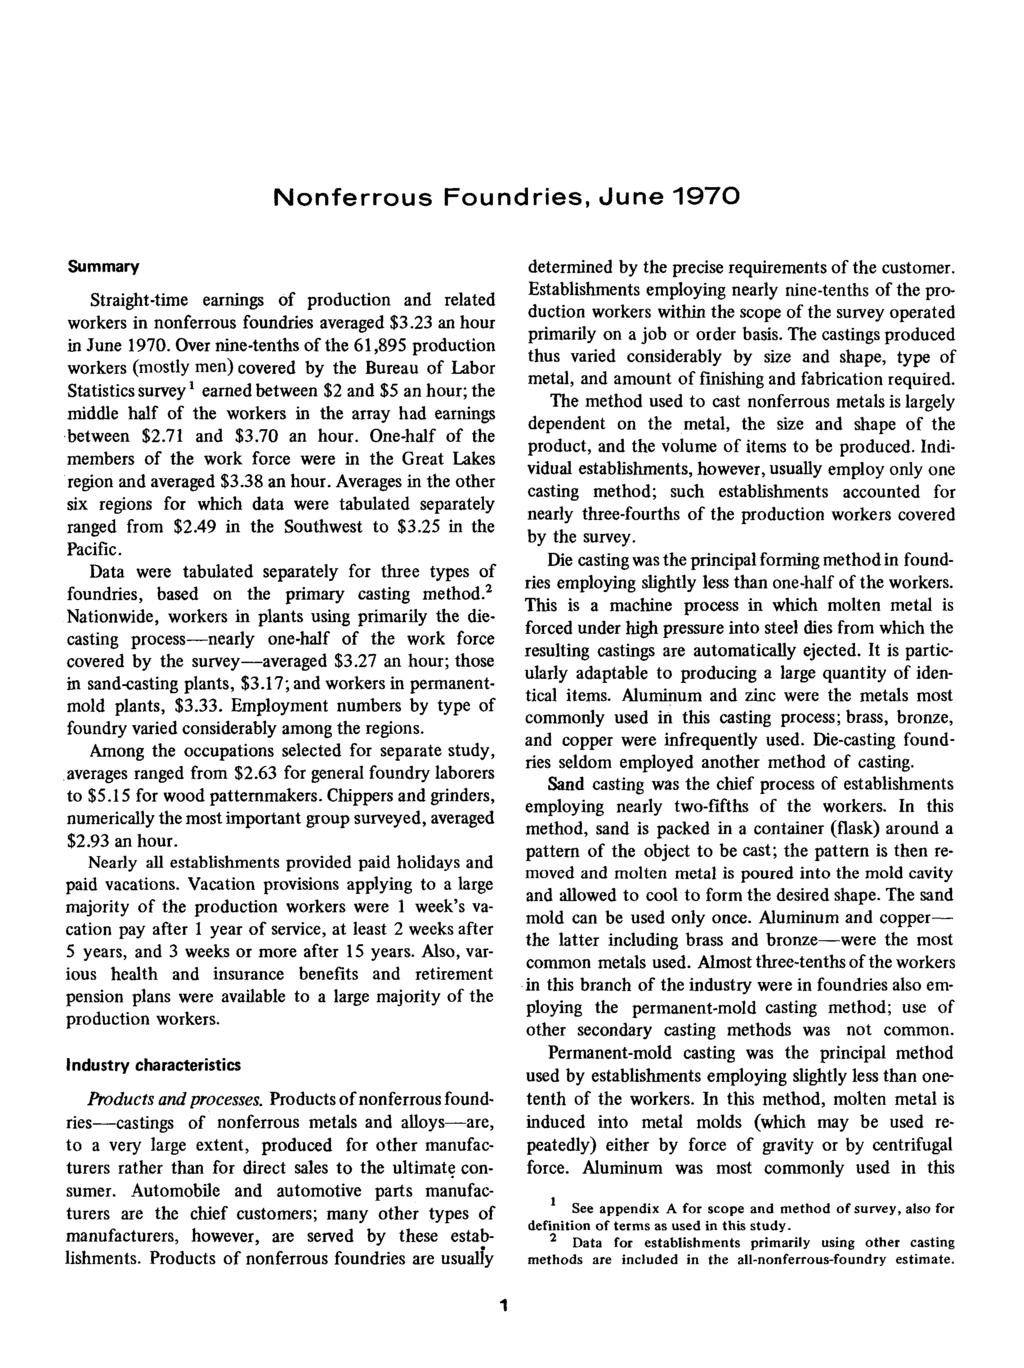 N o n fe rro u s F o u n d rie s, Ju n e 1 9 7 0 Summary Straight-time earnings production and related workers in nonferrous foundries averaged $3.23 an hour in June 1970.